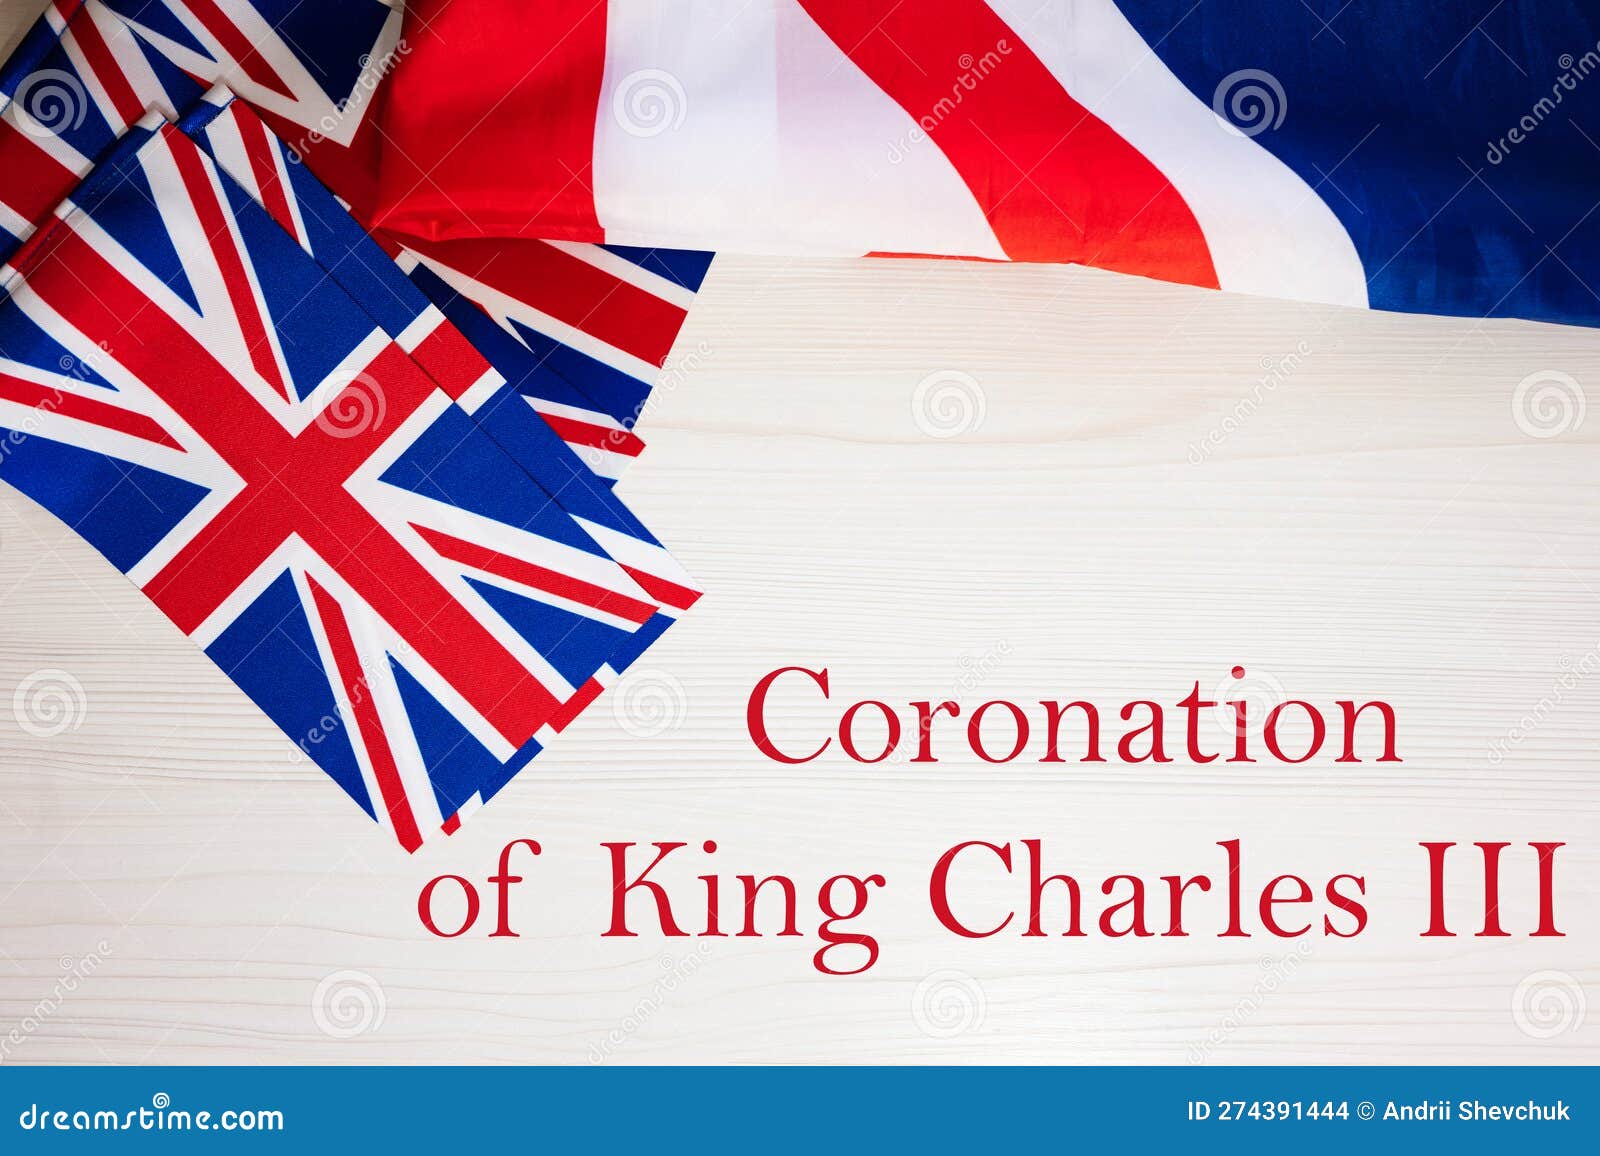 coronation of king charles iii. british holidays concept. holiday in united kingdom. great britain flag background